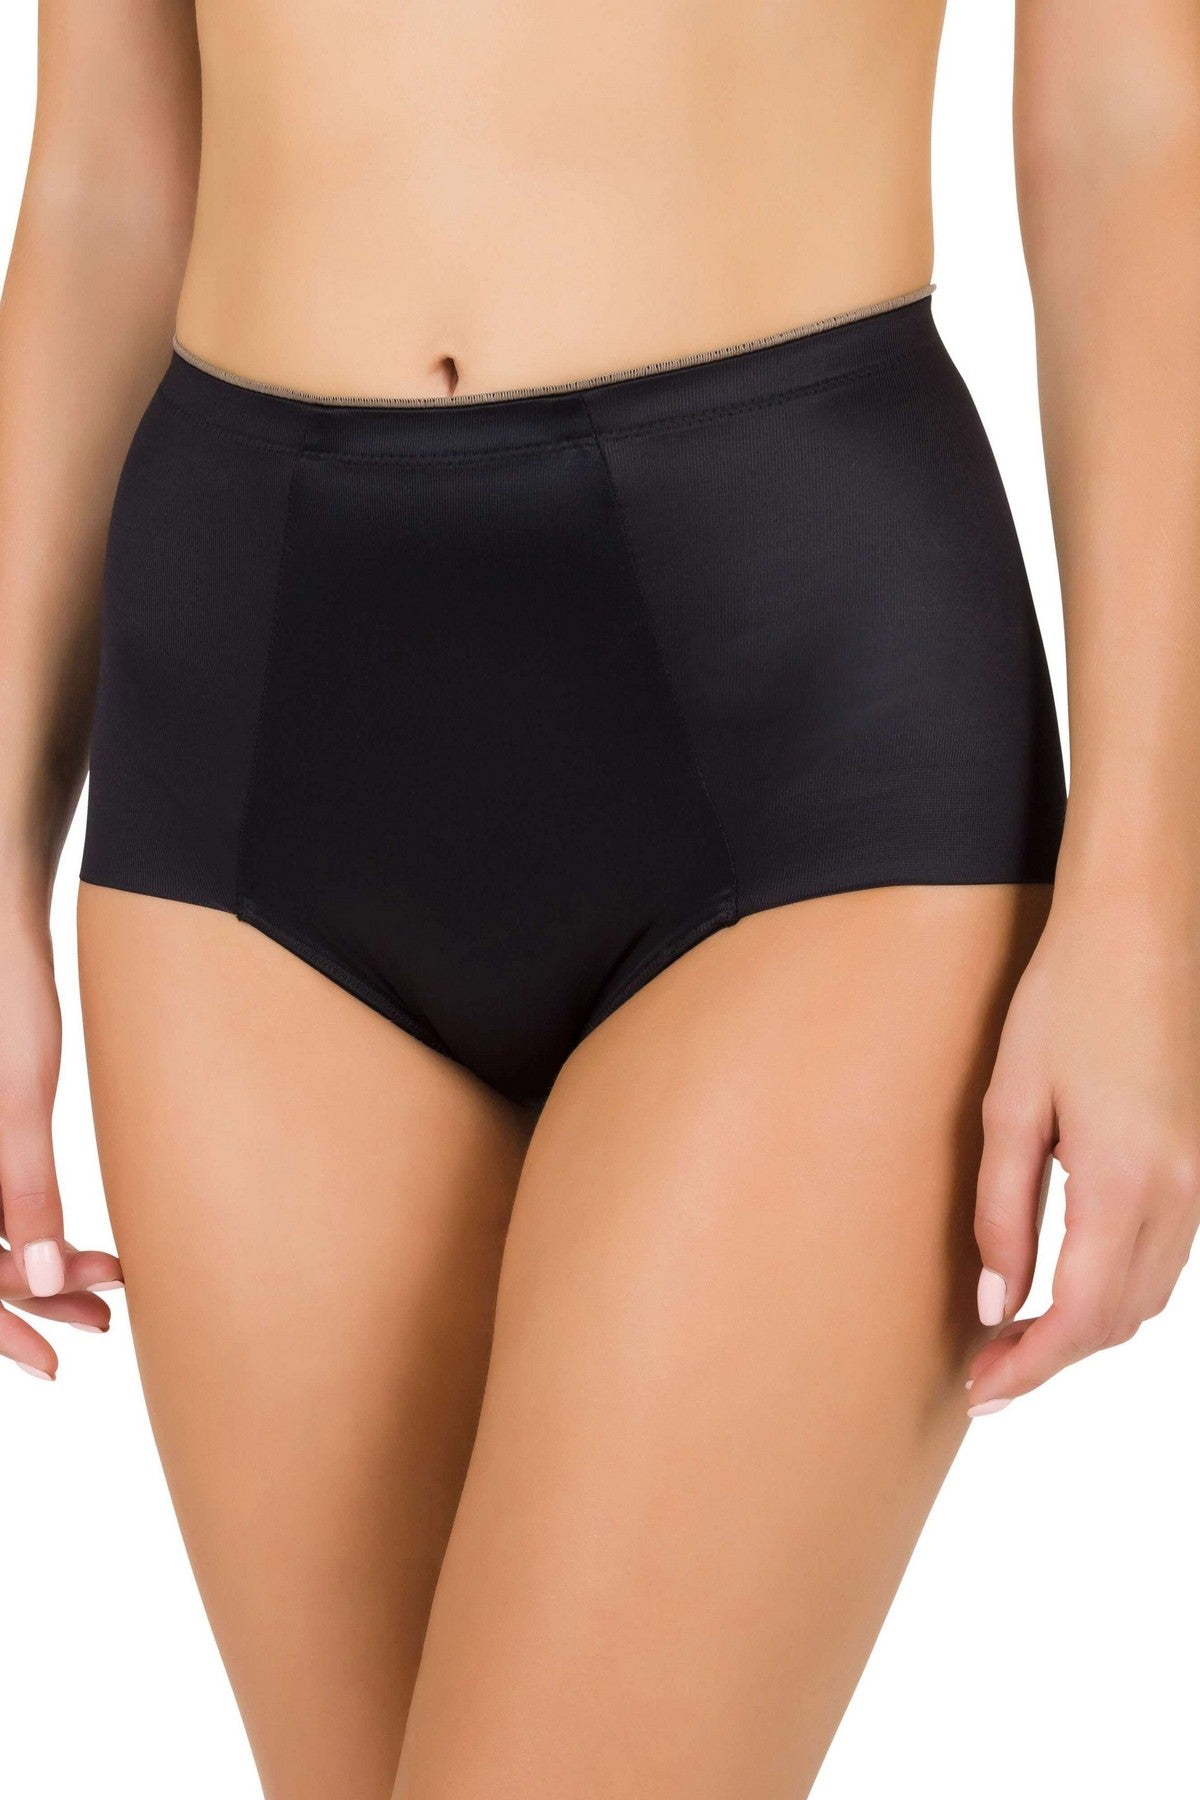 Felina Conturelle Soft Touch panty brief 004 BLACK buy for the